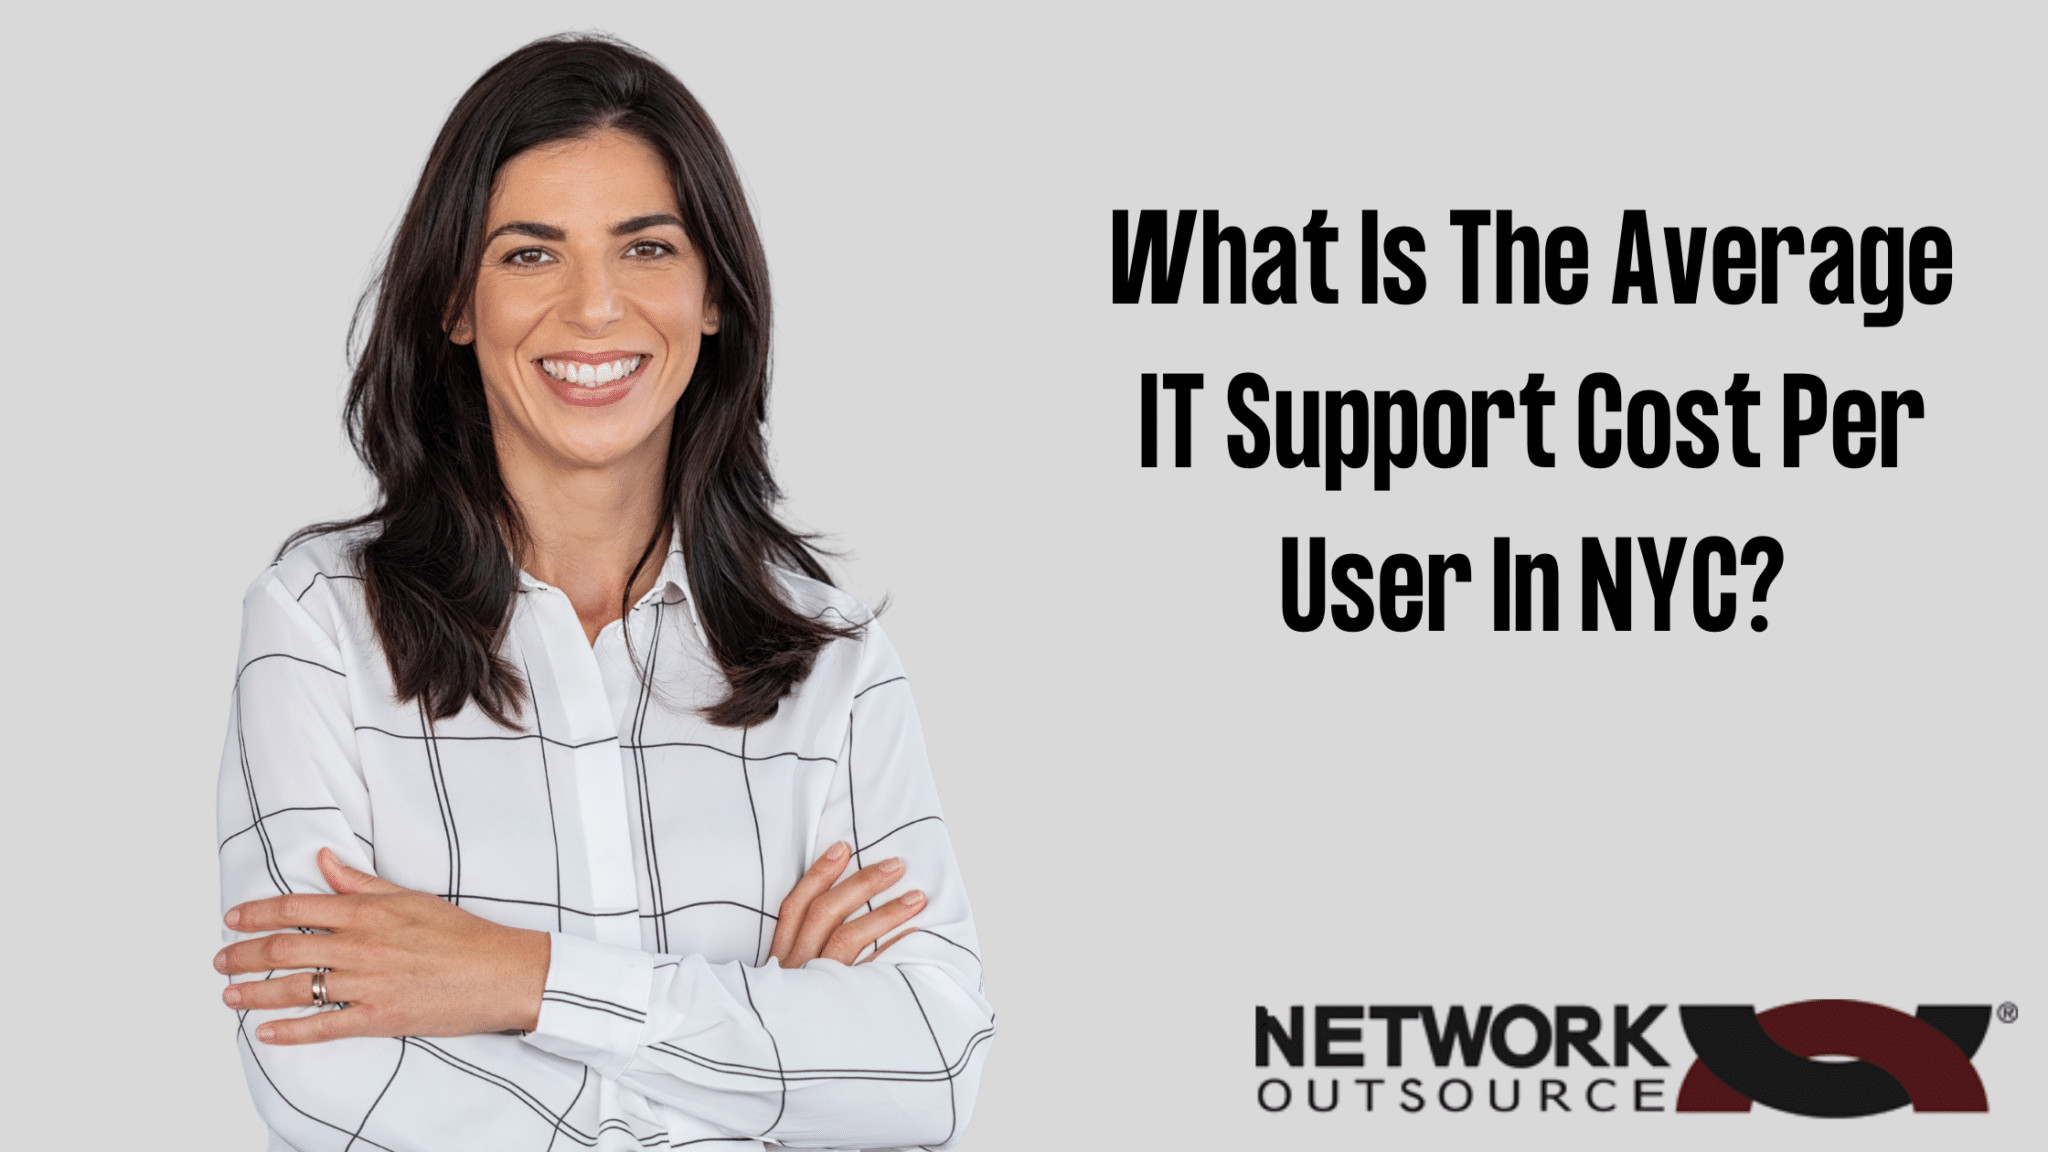 What Is The Average IT Support Cost Per User In NYC?